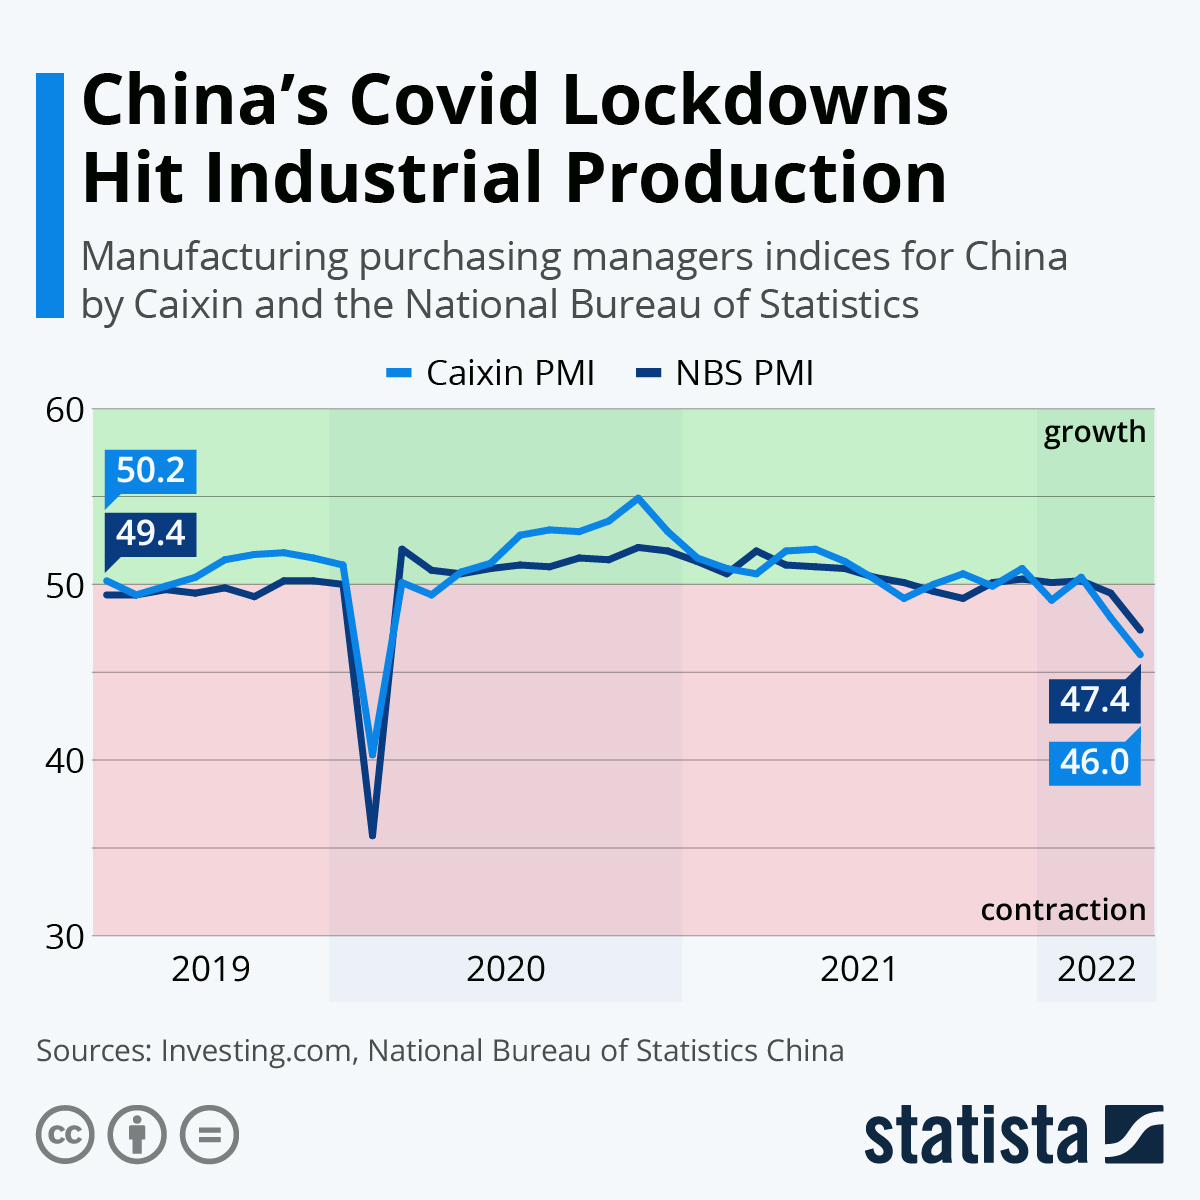 China's Covid Lockdowns Hit Industrial Production